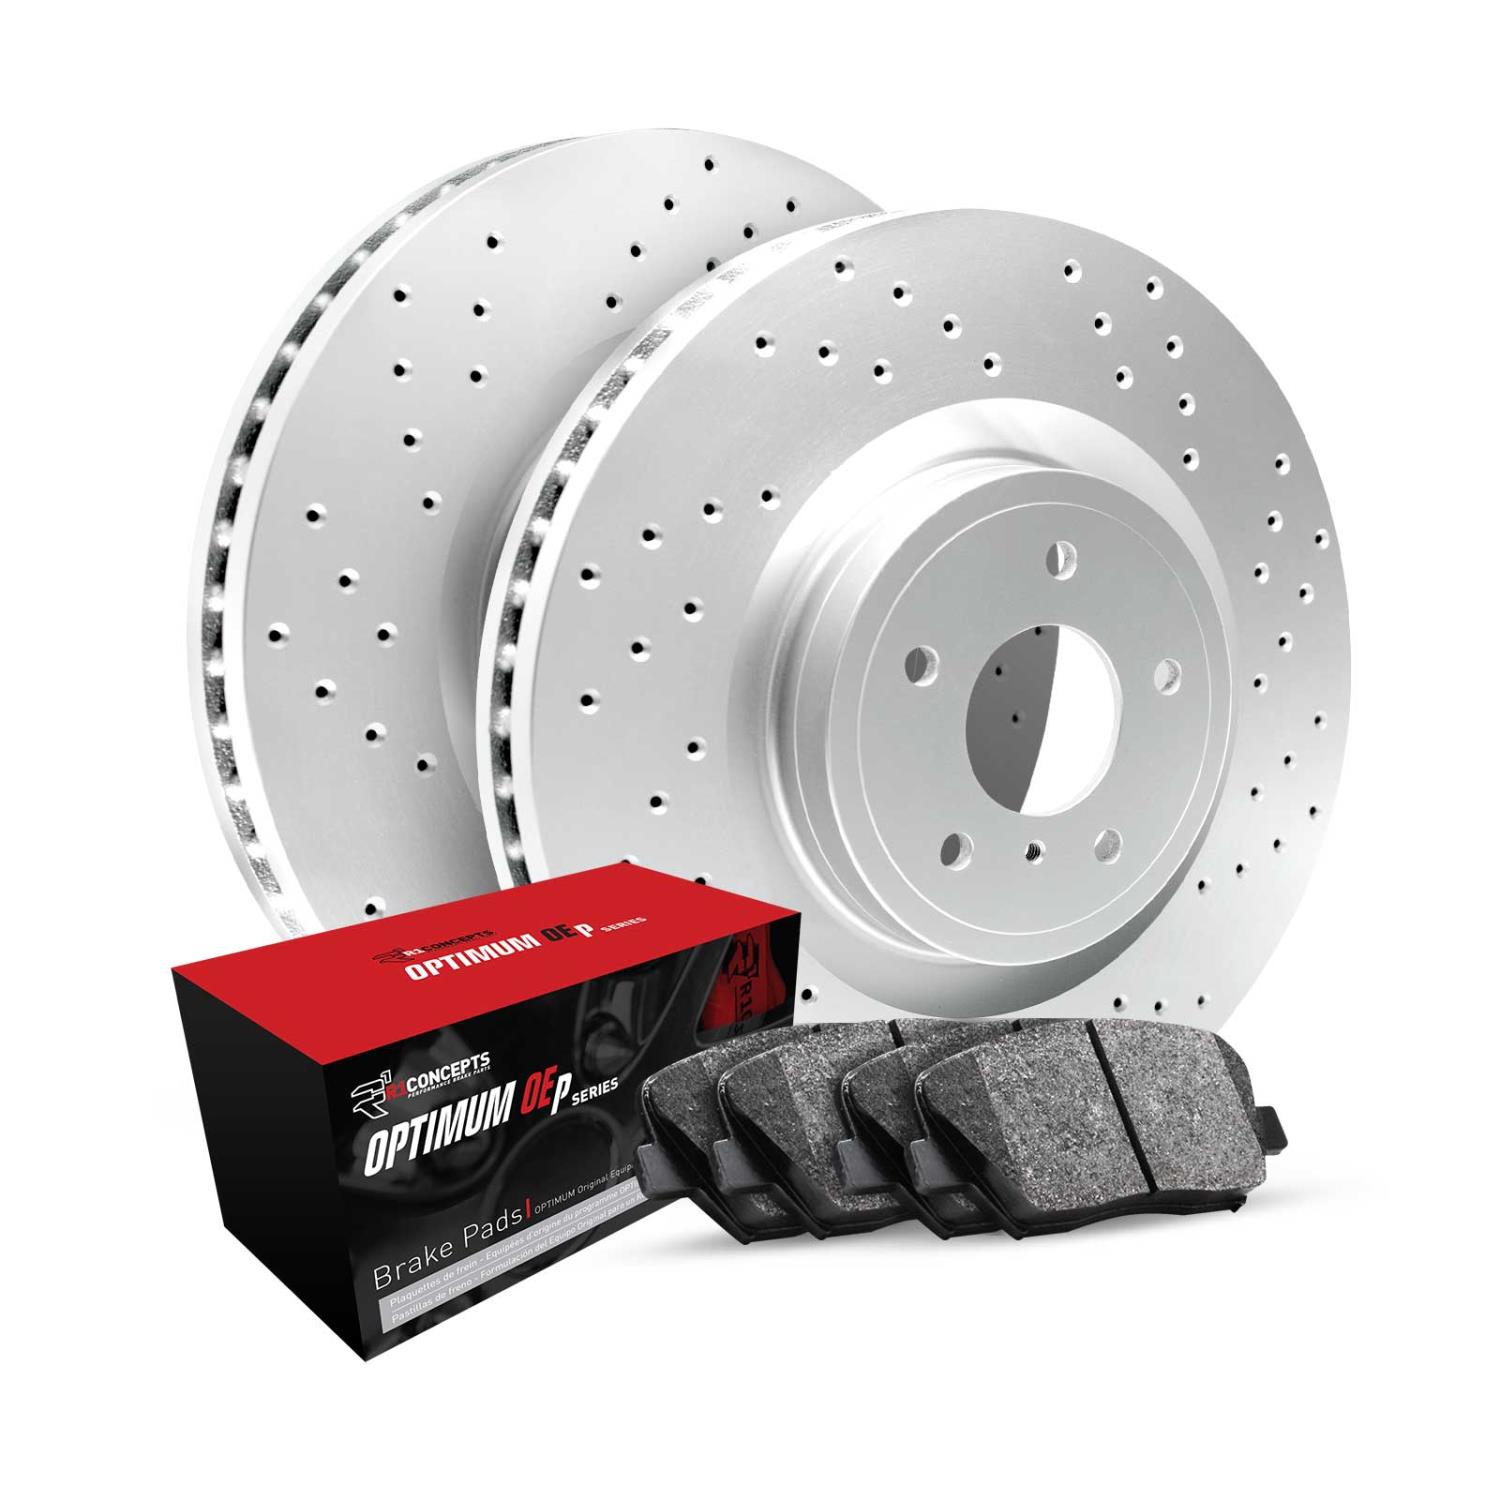 GEO-Carbon Drilled Brake Rotor Set w/Optimum OE Pads, Fits Select Fits Multiple Makes/Models, Position: Rear